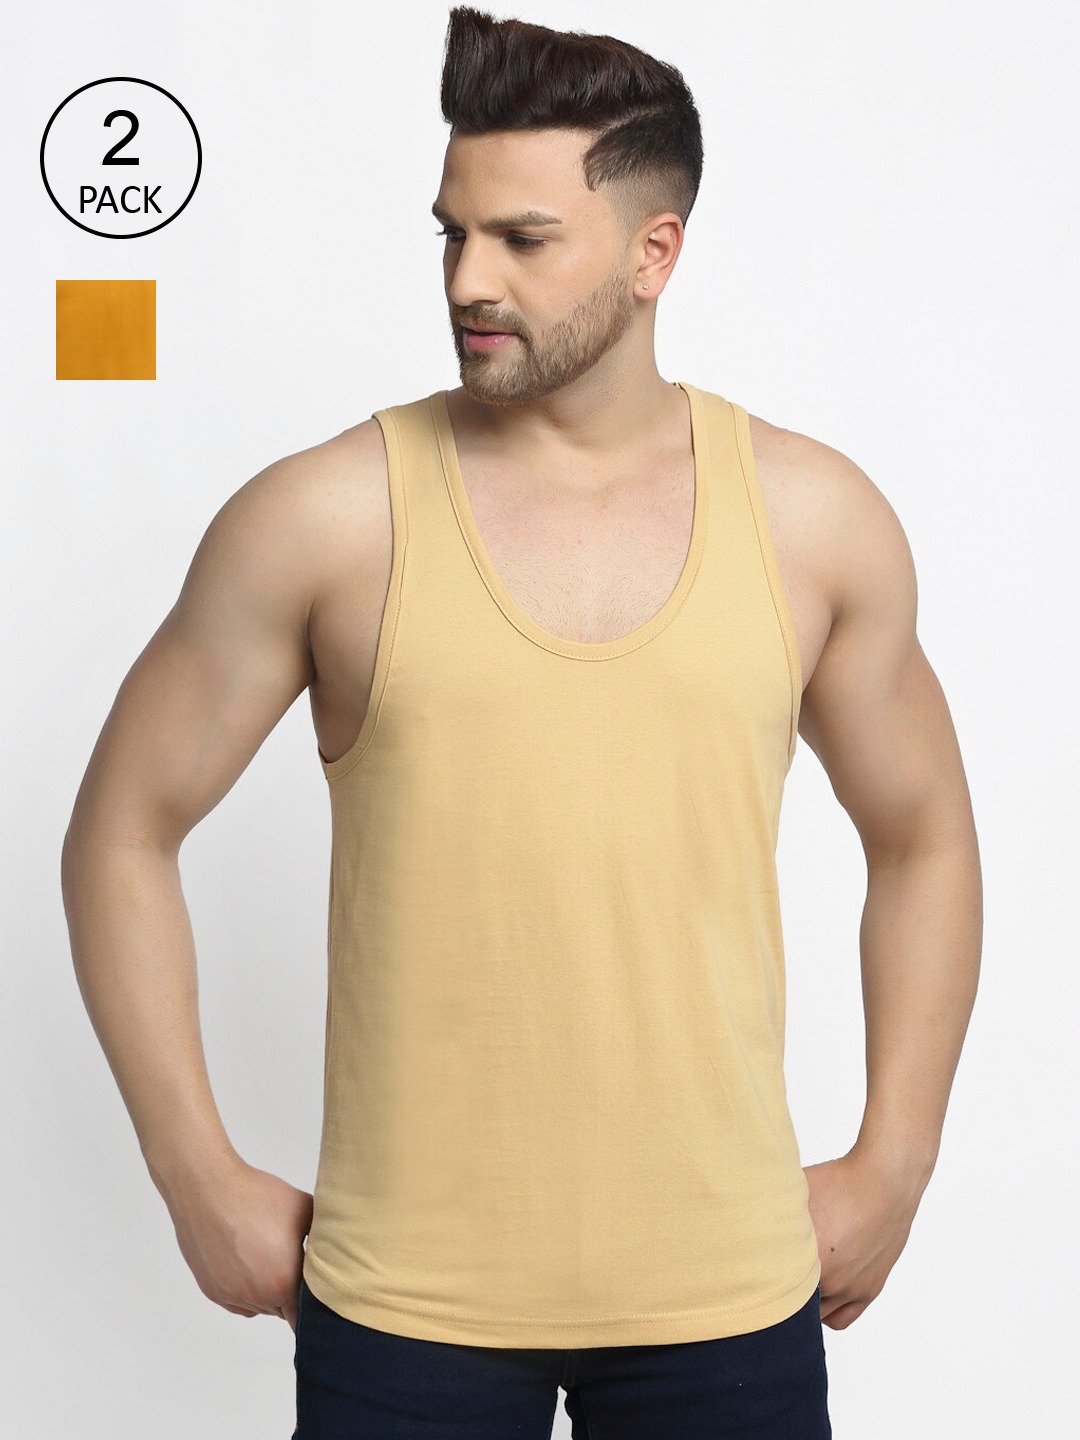 Clothing Innerwear Vests | Friskers Men Beige & Yellow Pack of 2 Pure Cotton Solid Vest - VH08134